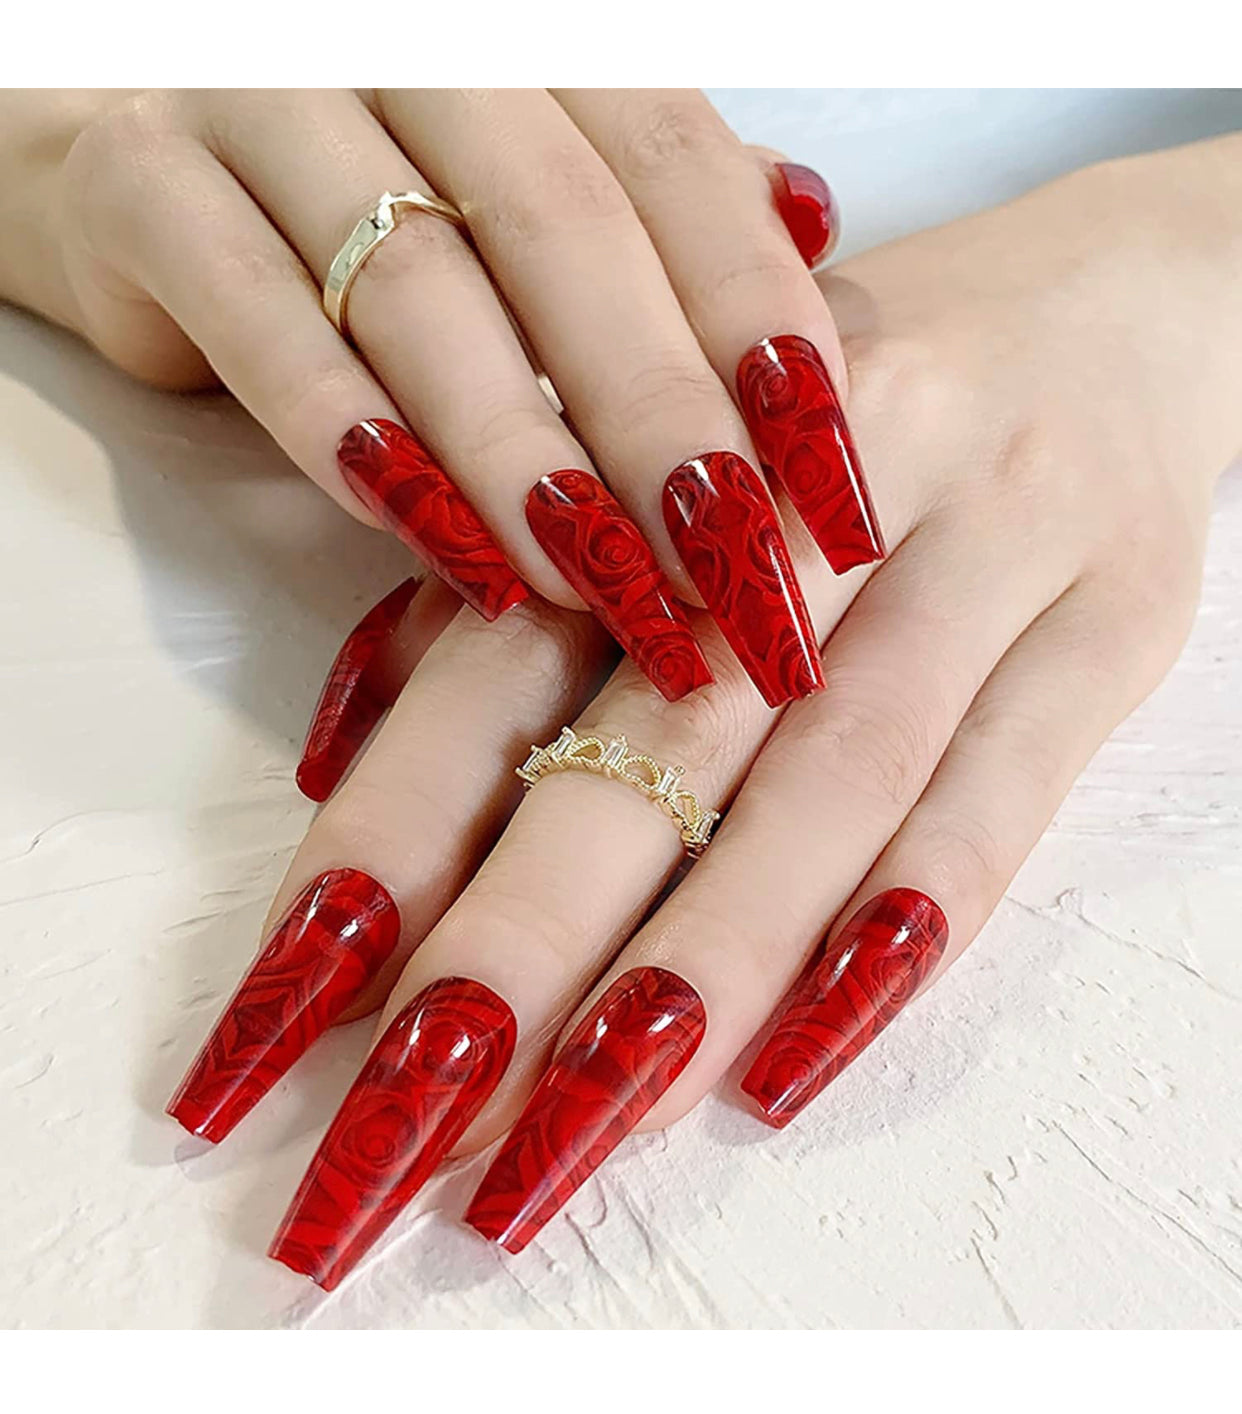 Simple nail art design with bright red nail polish . Inspiration for your  next diy manicure❤️ . Let me know if you loved this summer nail… | Instagram